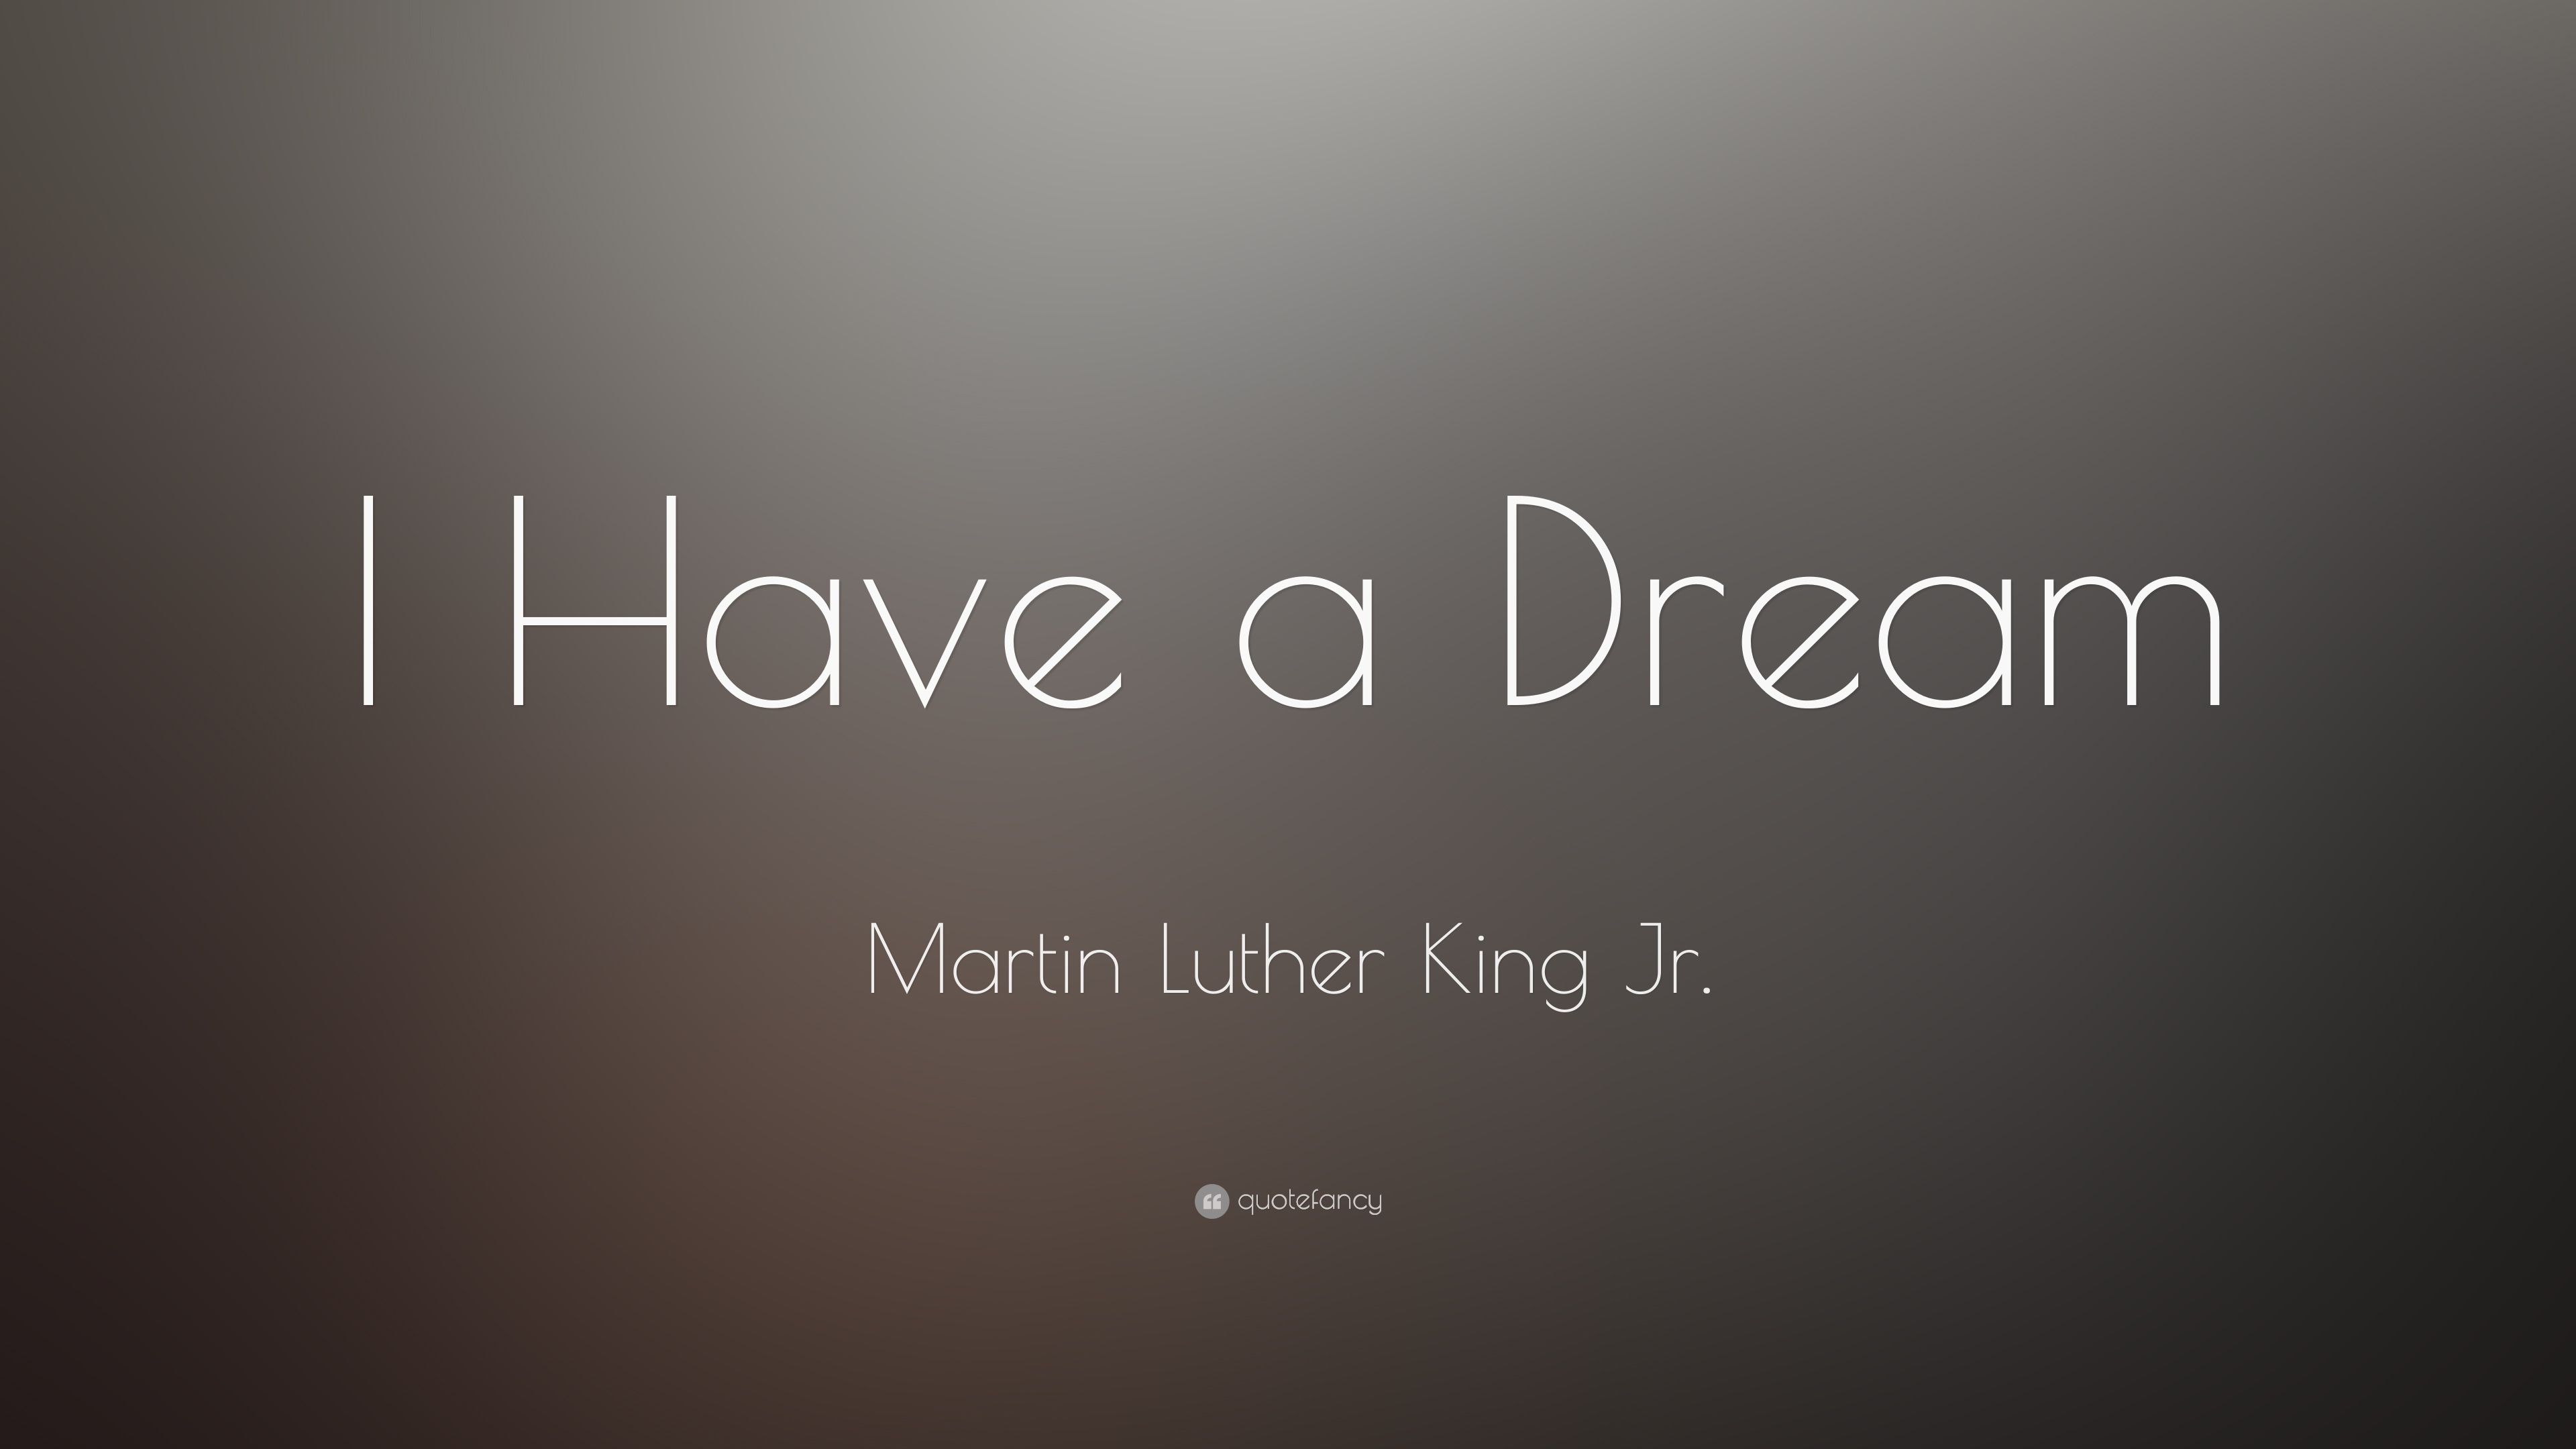 I Have a Dream Wallpaper. Have Faith Background, Angels We Have Heard On High Wallpaper and Have You Ever Wallpaper